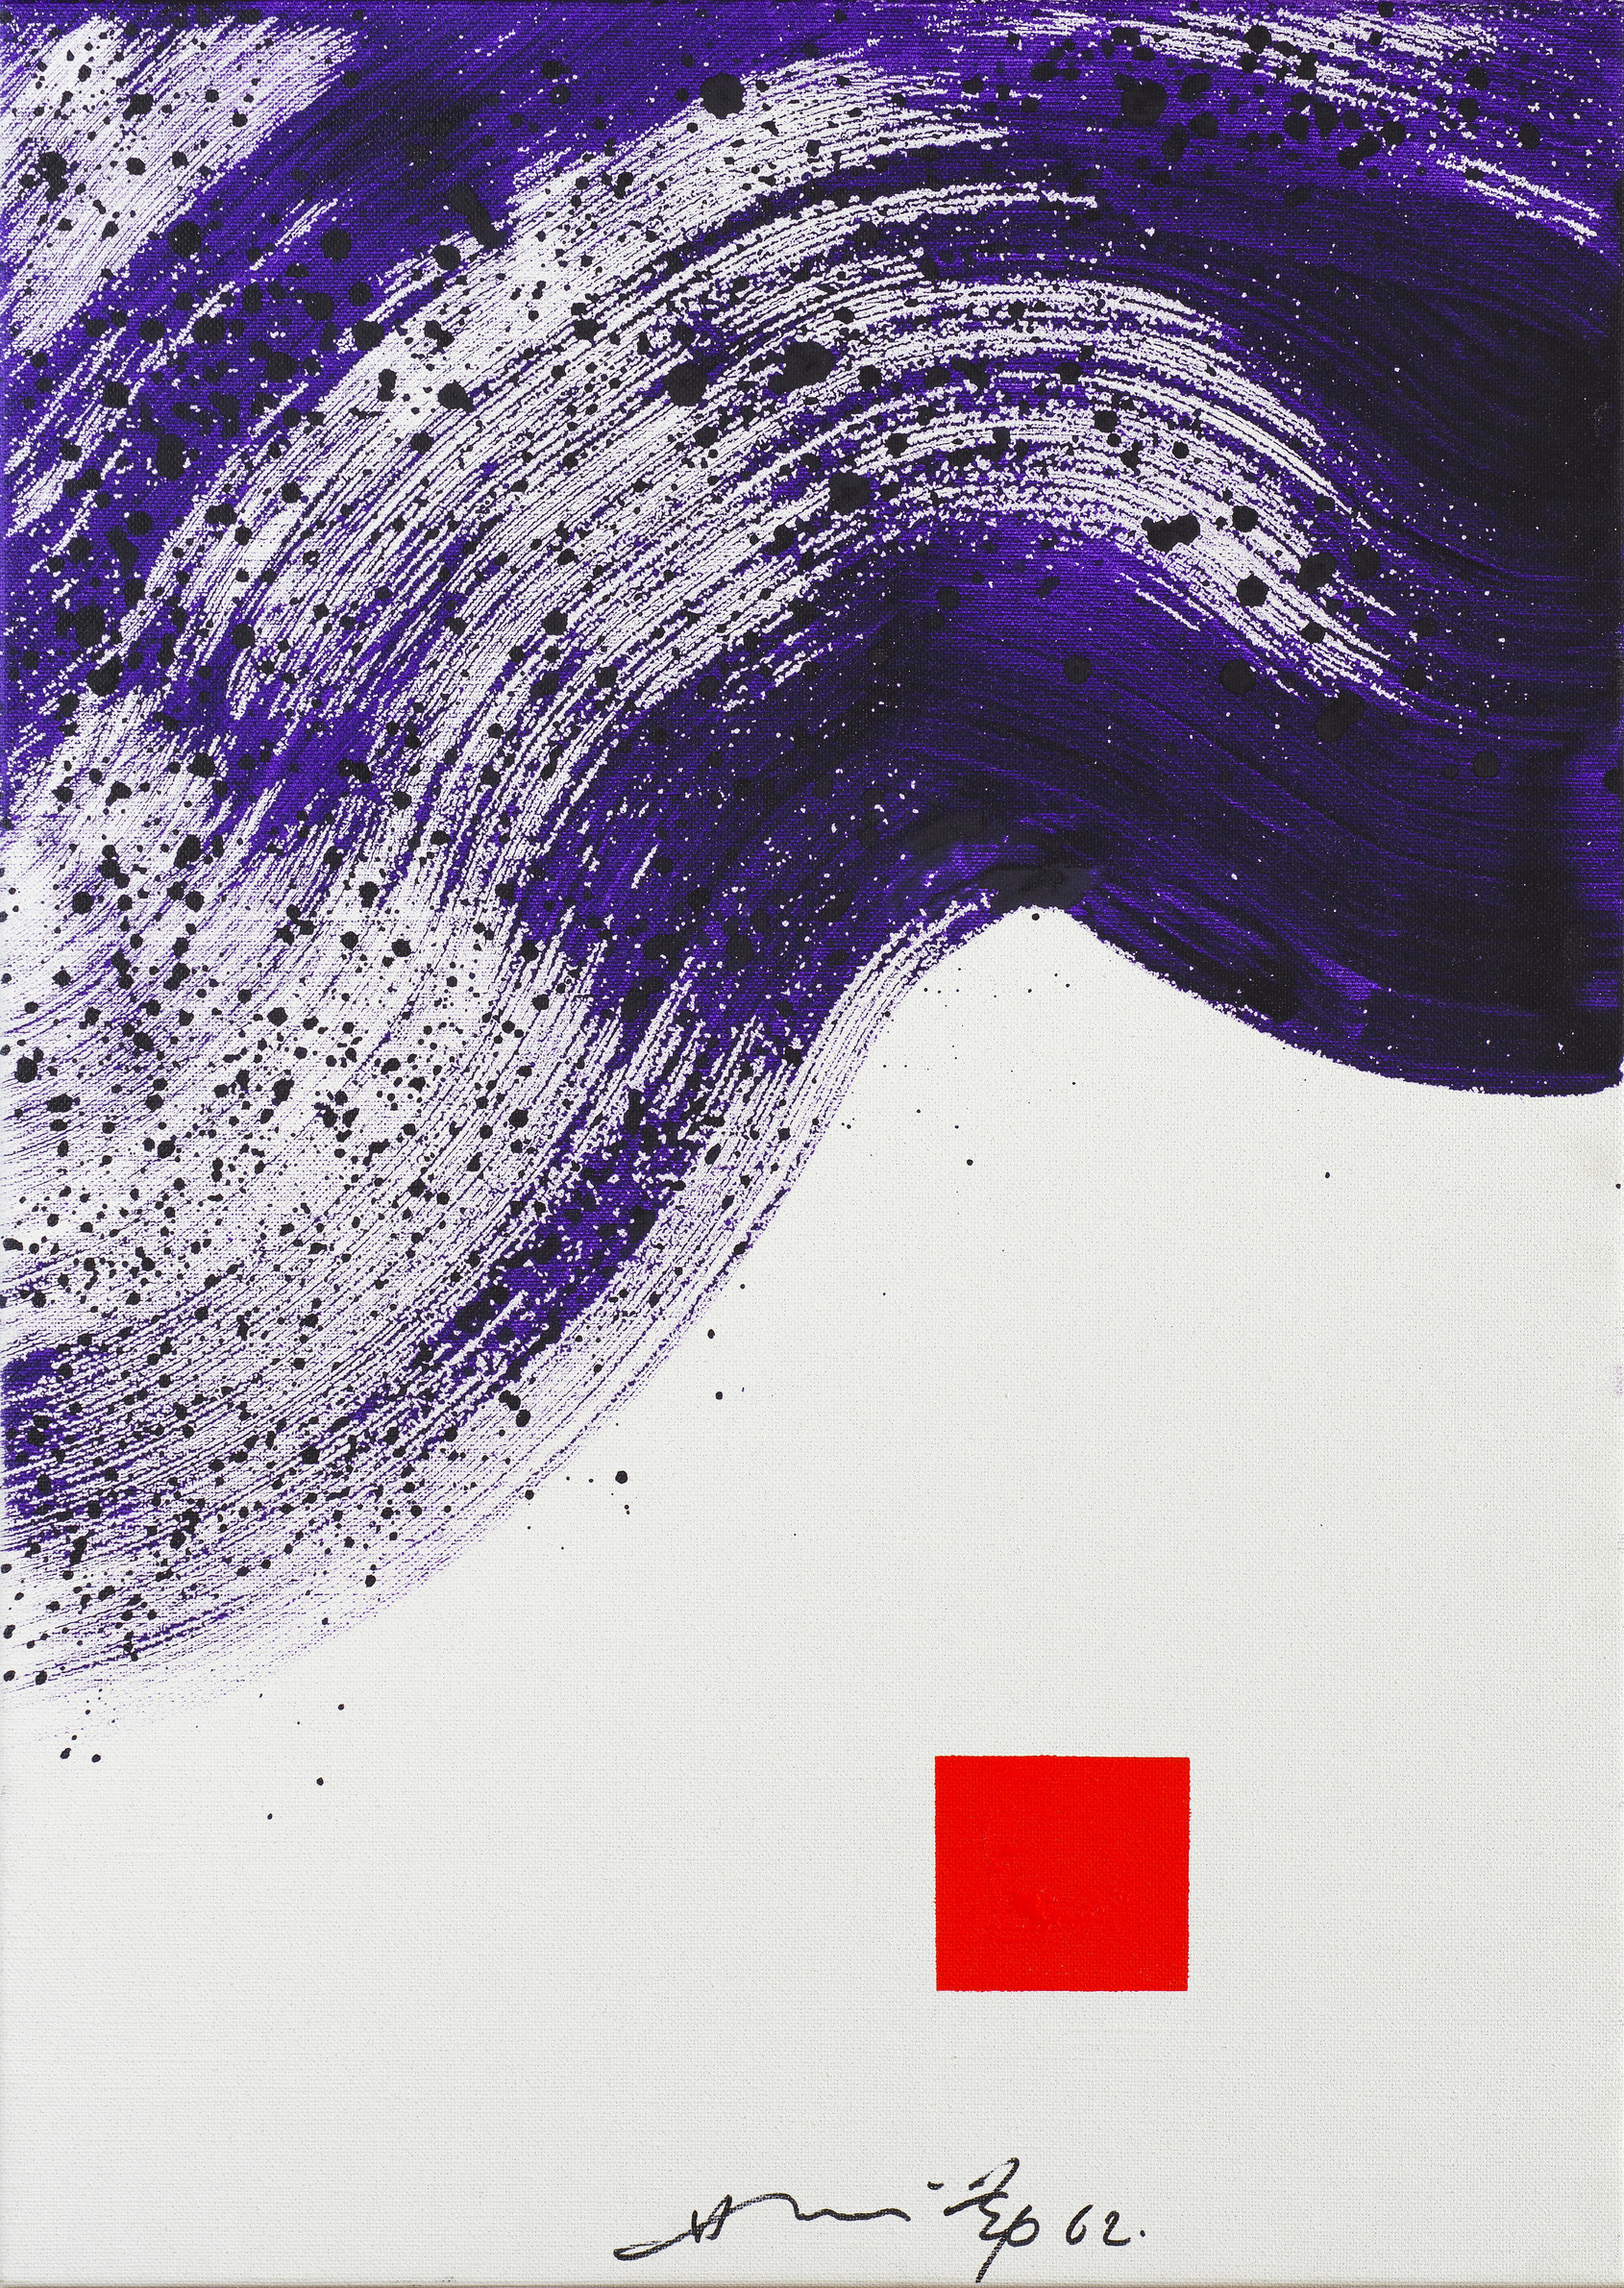 The Beginning of Tao – 2, 1962, 70 x 50 cm Encre et acrylique sur toile Ink and acrylic on canvas Collection privée / Private collection, Europe 